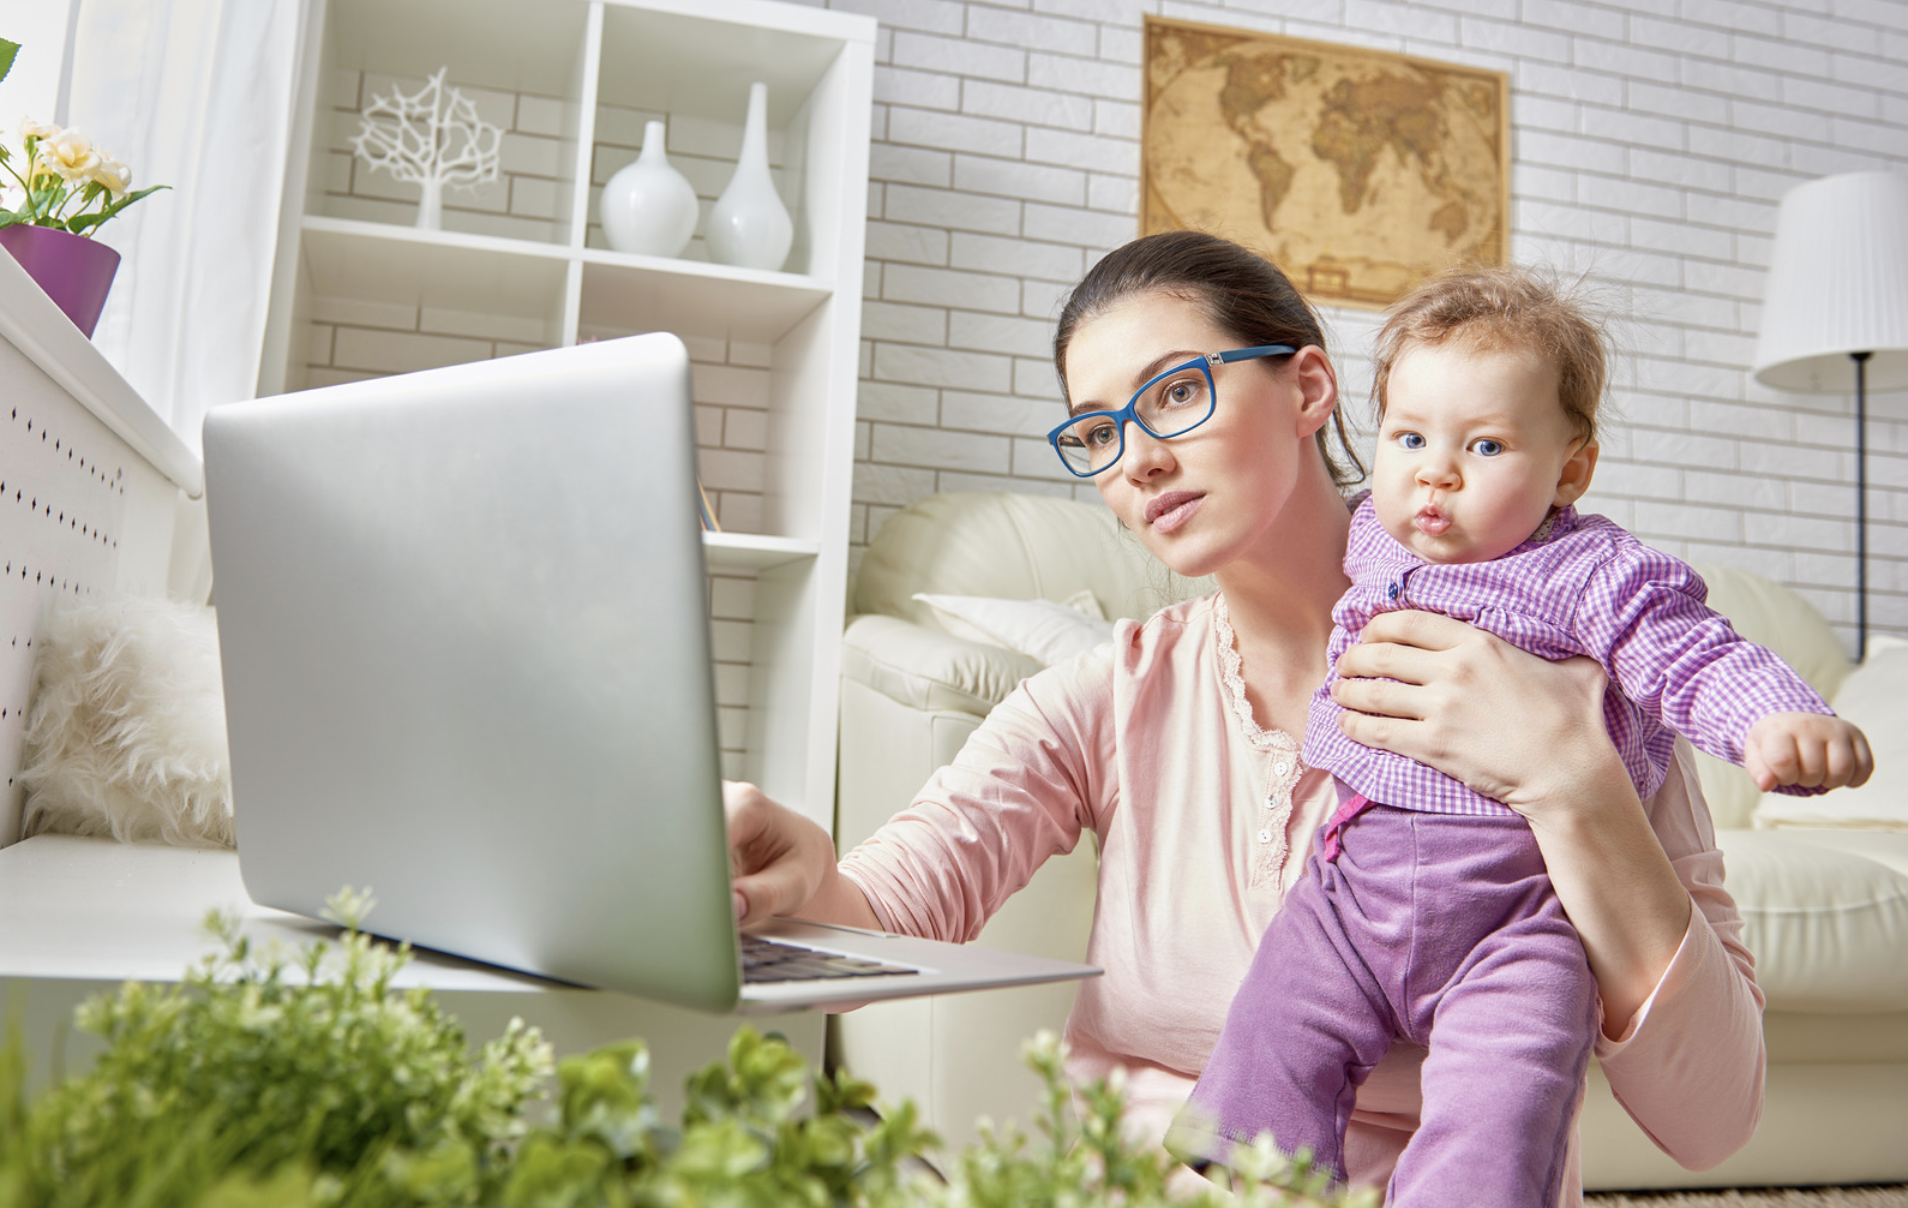 5 Incredible Time-Saving Services for Busy Moms